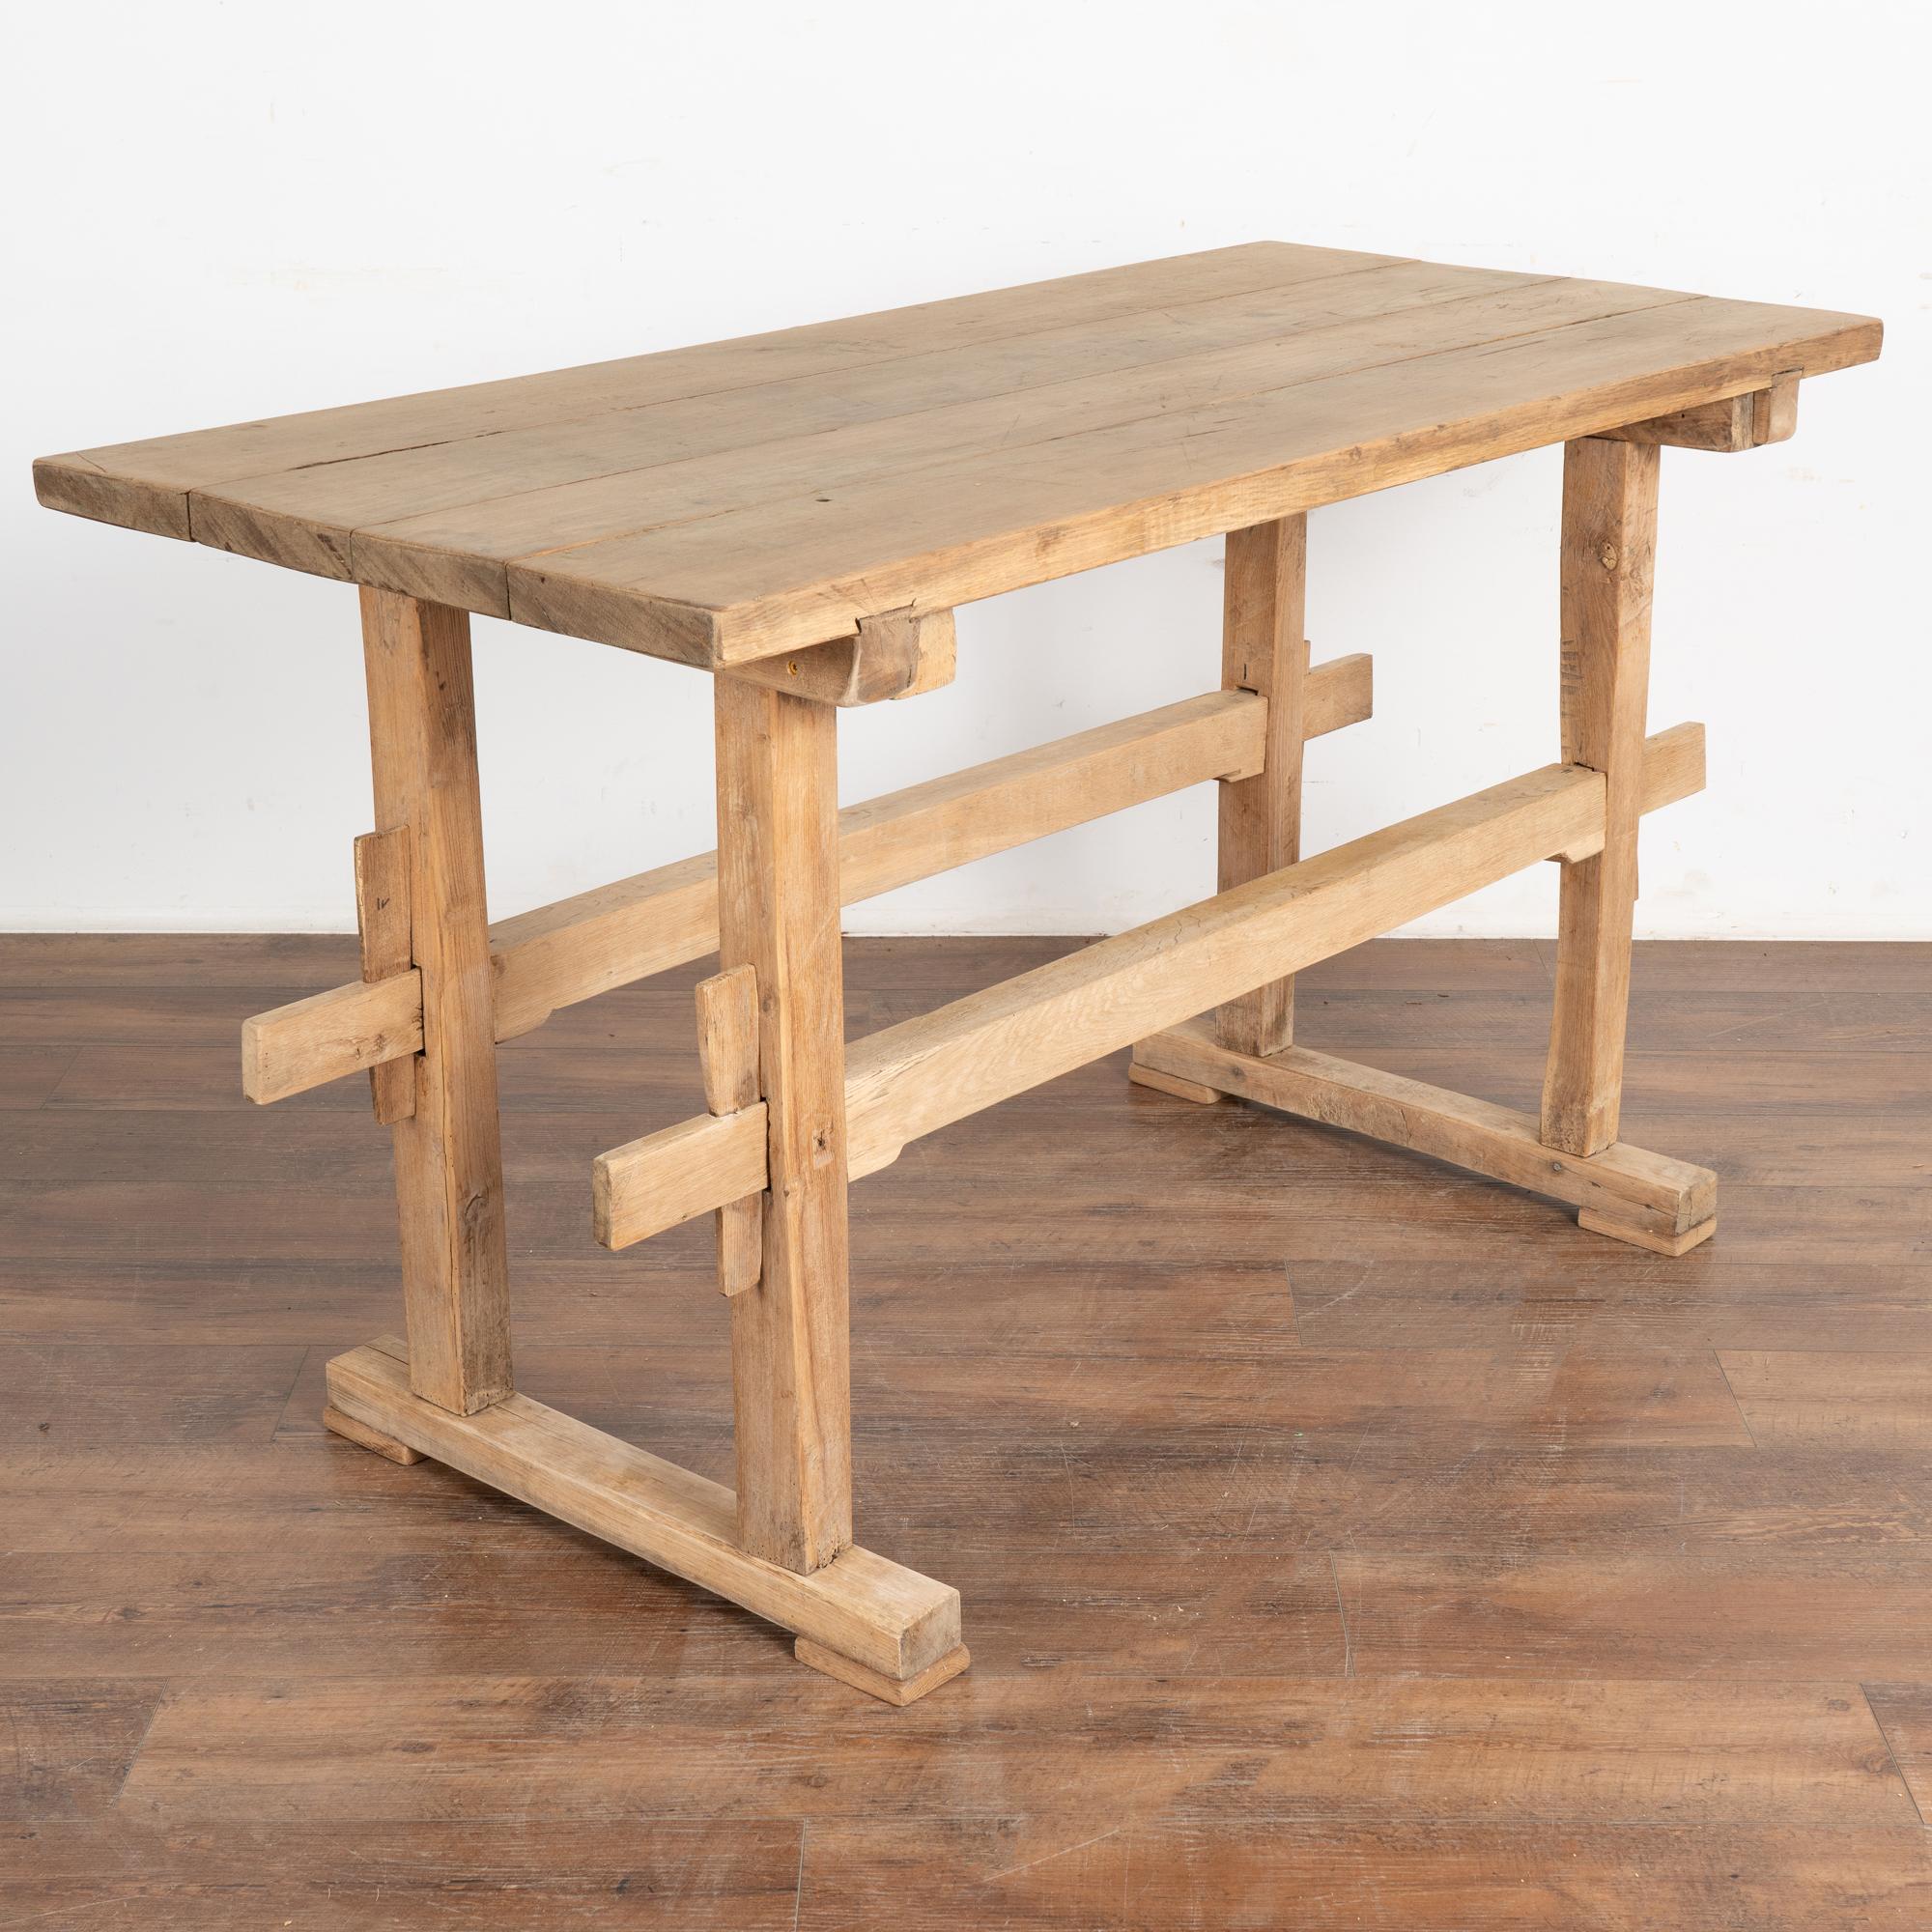 This wonderful old farm table from the European countryside will serve well as a rustic table in today's modern home.
This trestle table originally served as a  work table. Look at photos of the top to appreciate the gouges, scrapes, nicks and